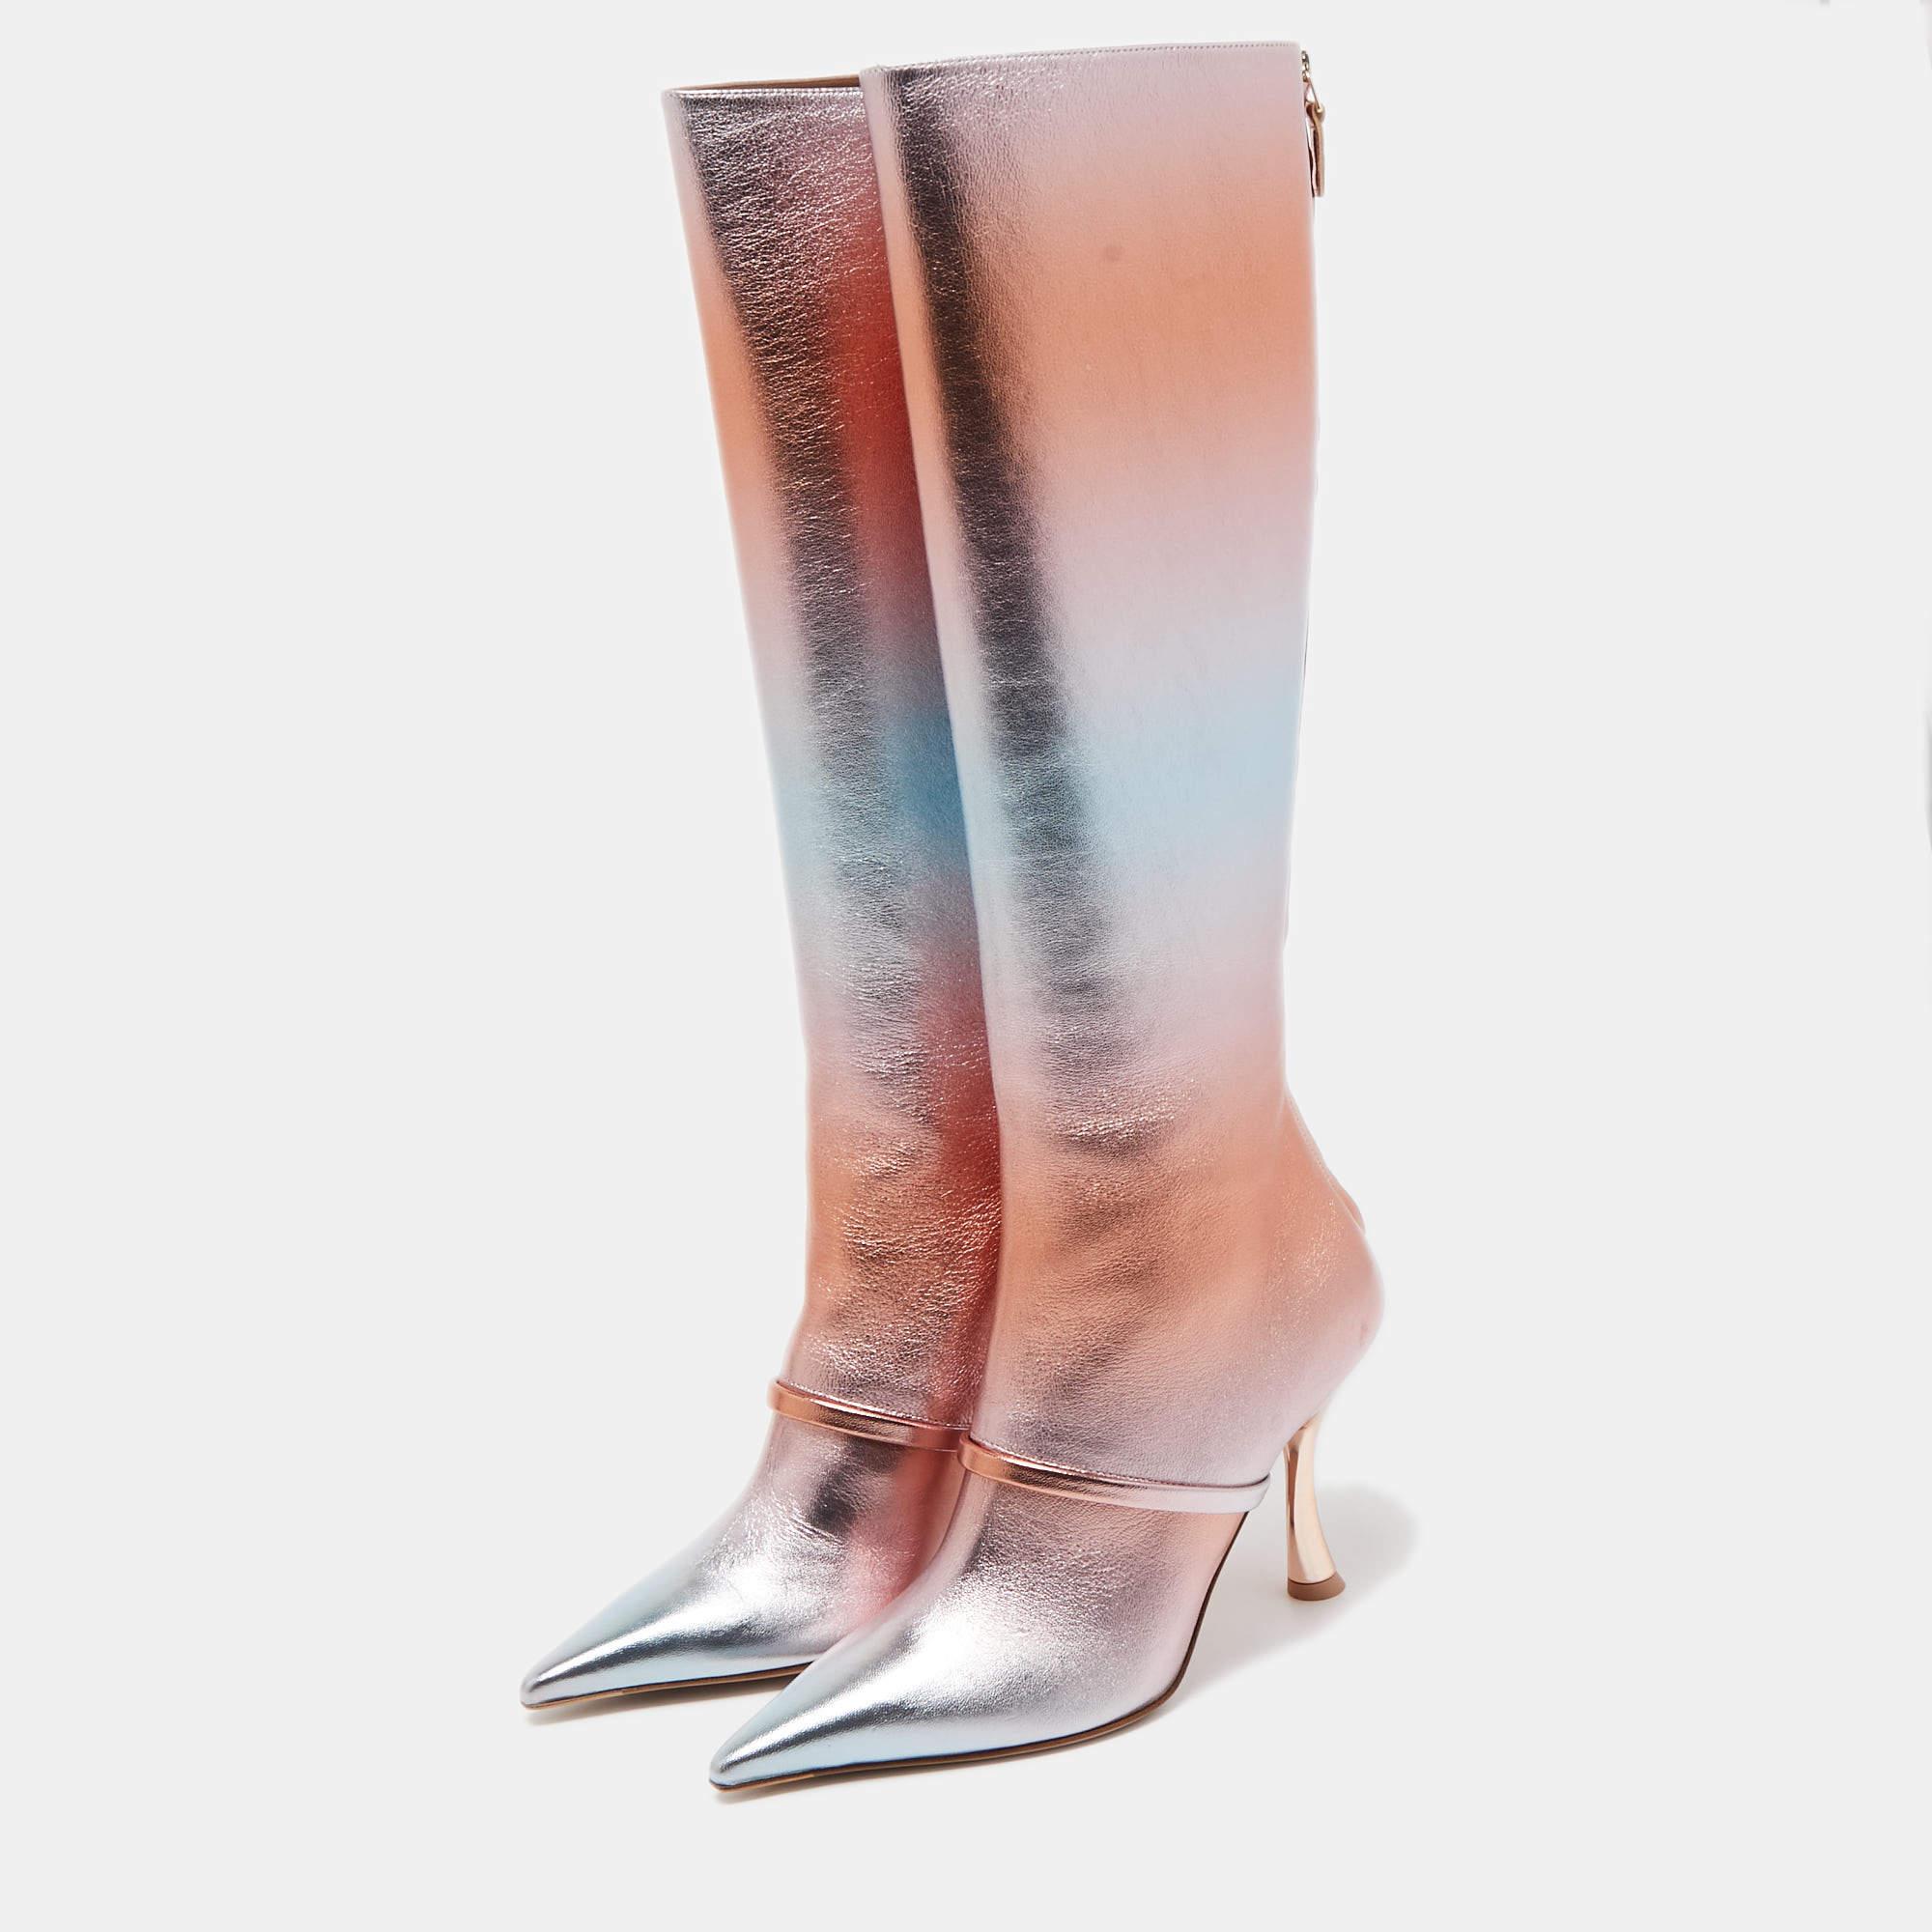 Malone Souliers Multicolor Metallic Leather Knee Length Boots Size 37 For Sale 4